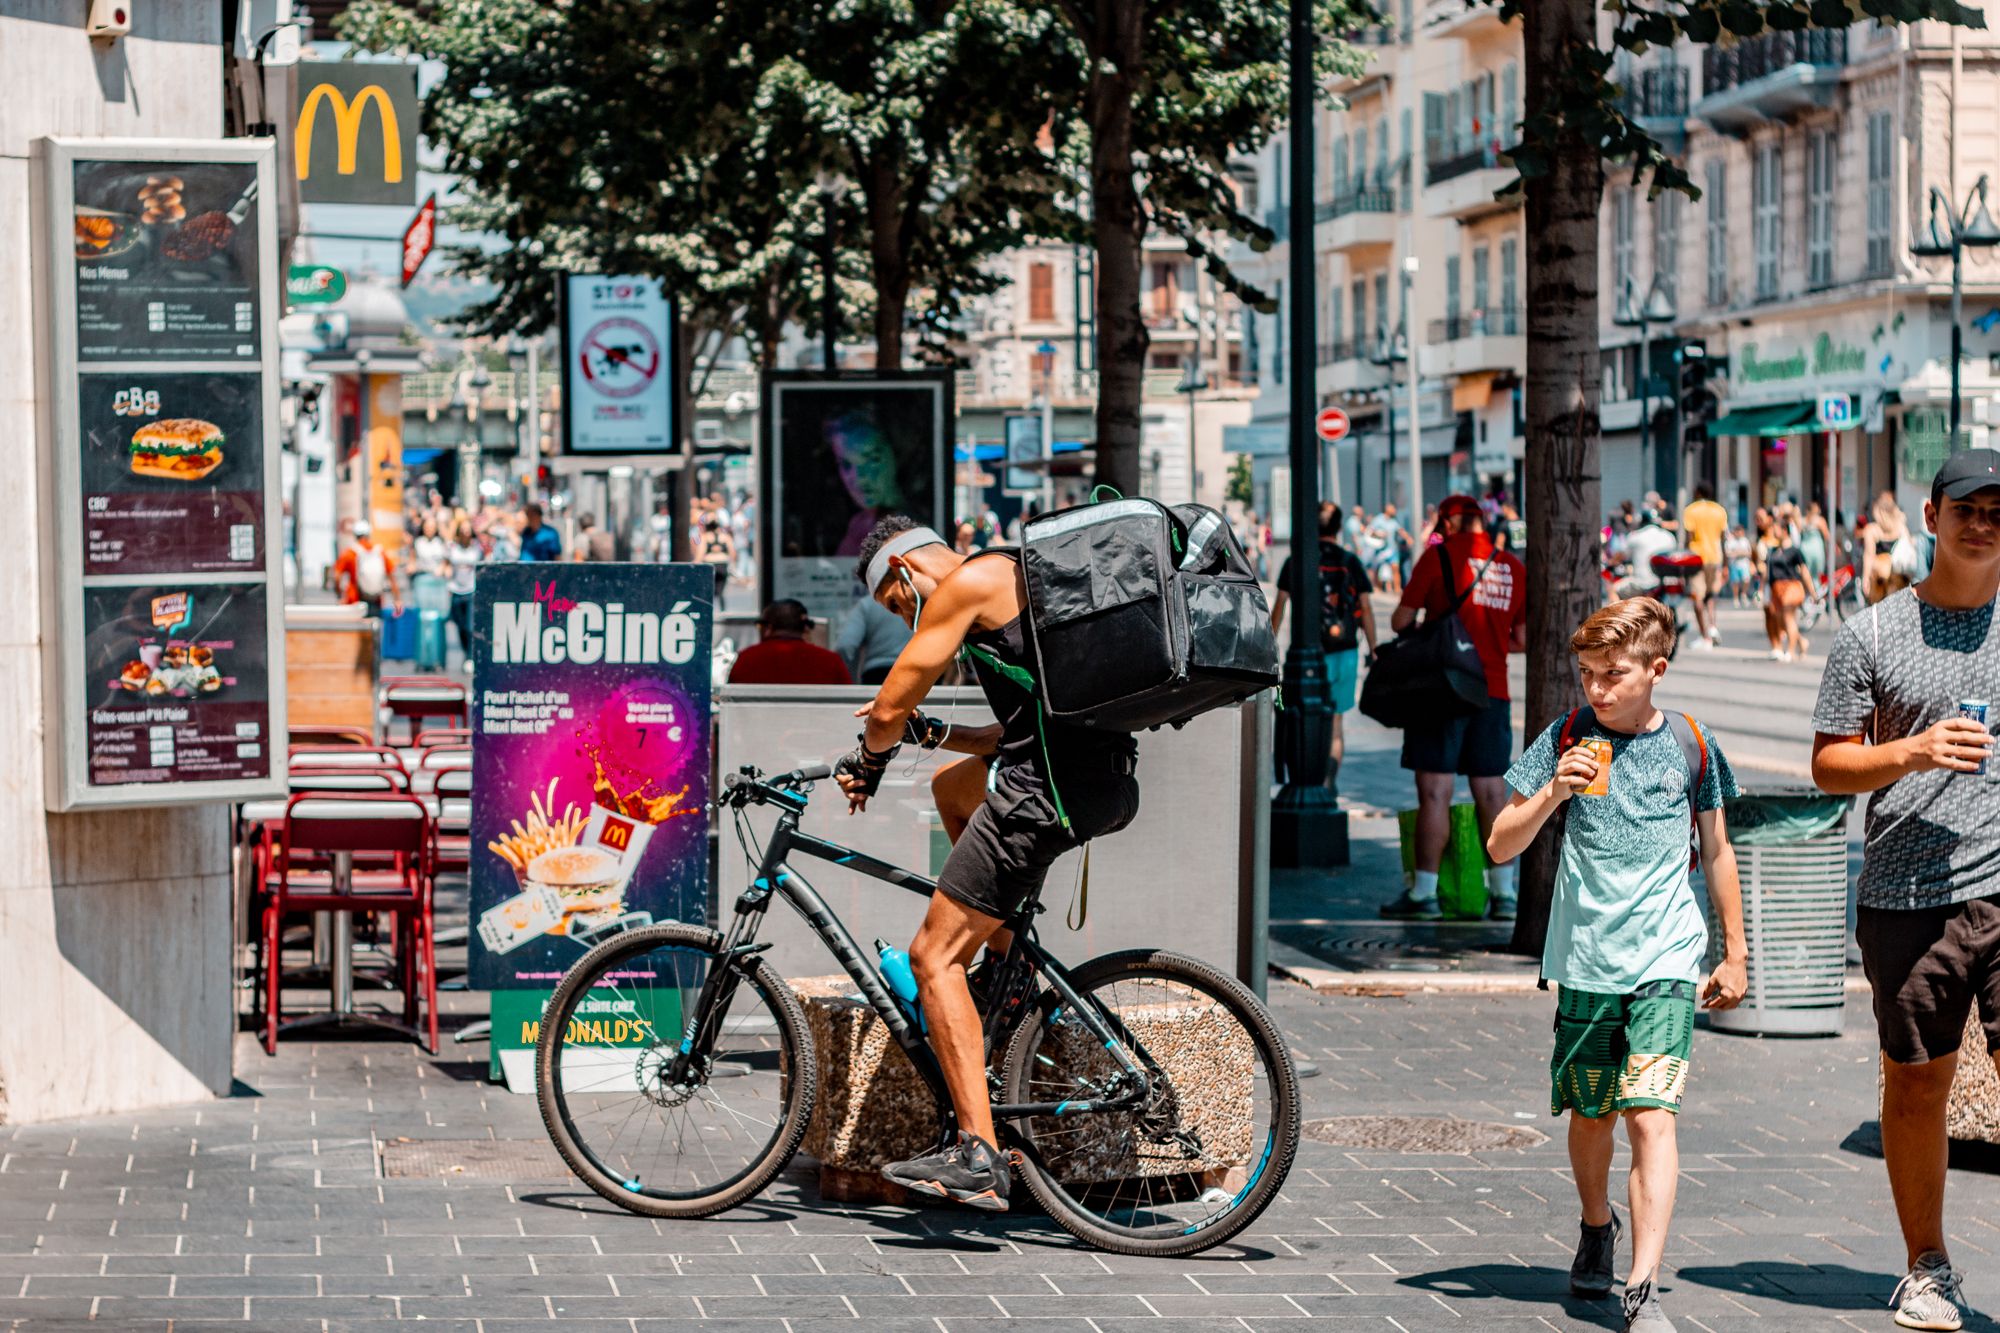  A delivery guy on his bicycle outside McDonalds in Nice: A photo by David Elikwu